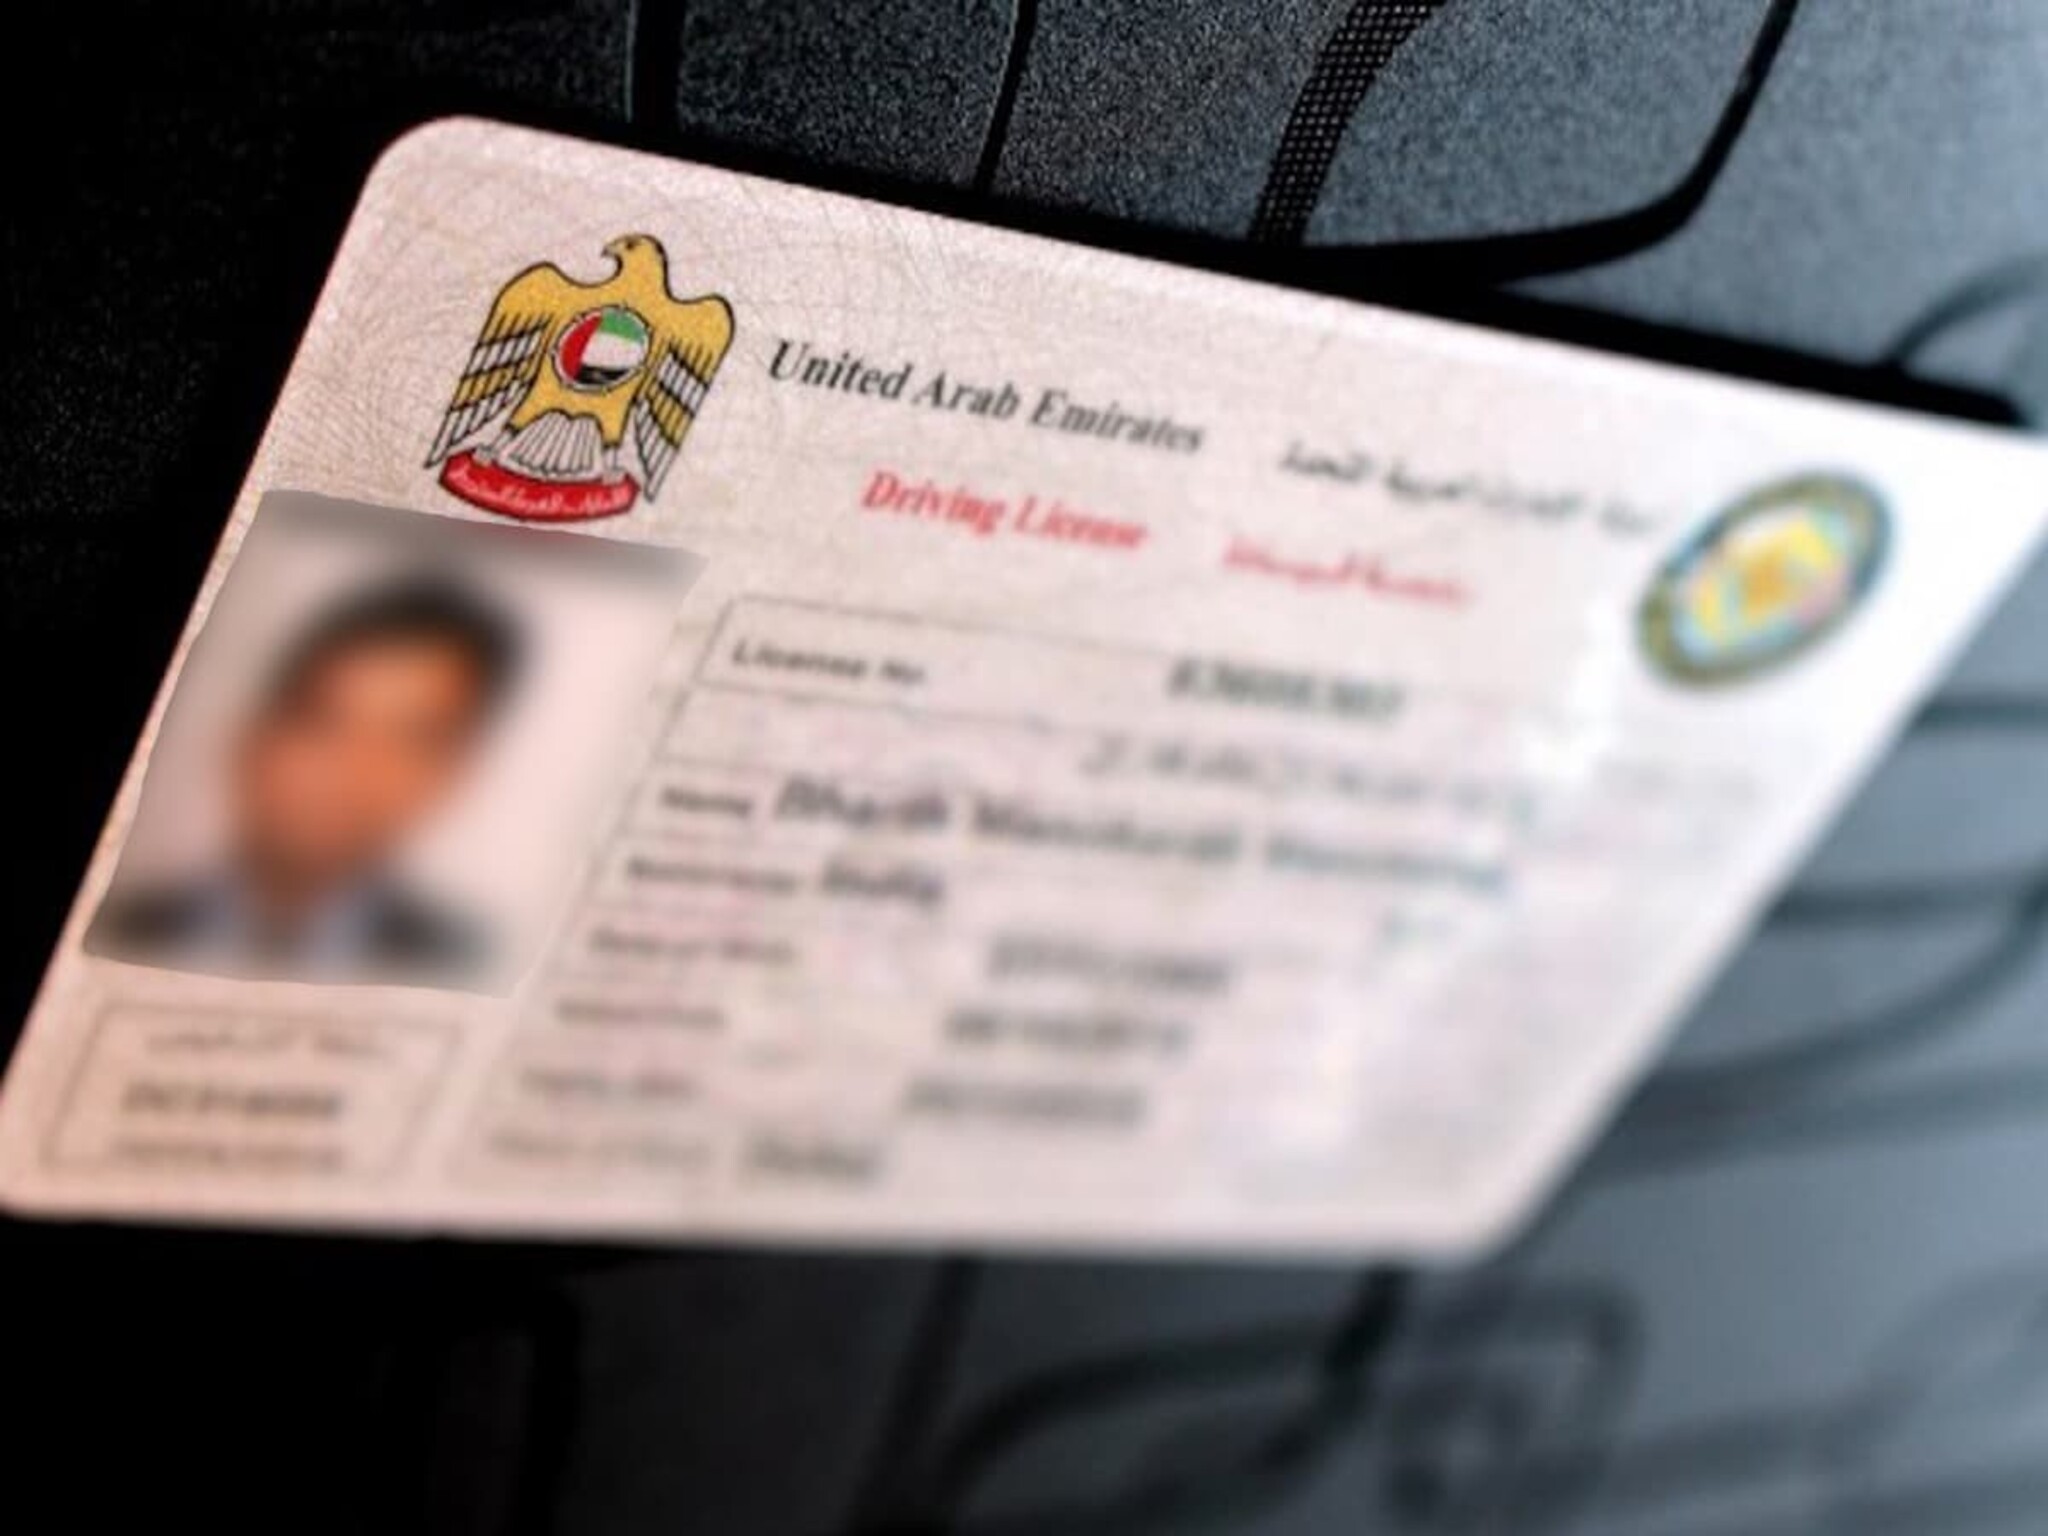 The traffic fines in Dubai have an impact on drivers' licenses